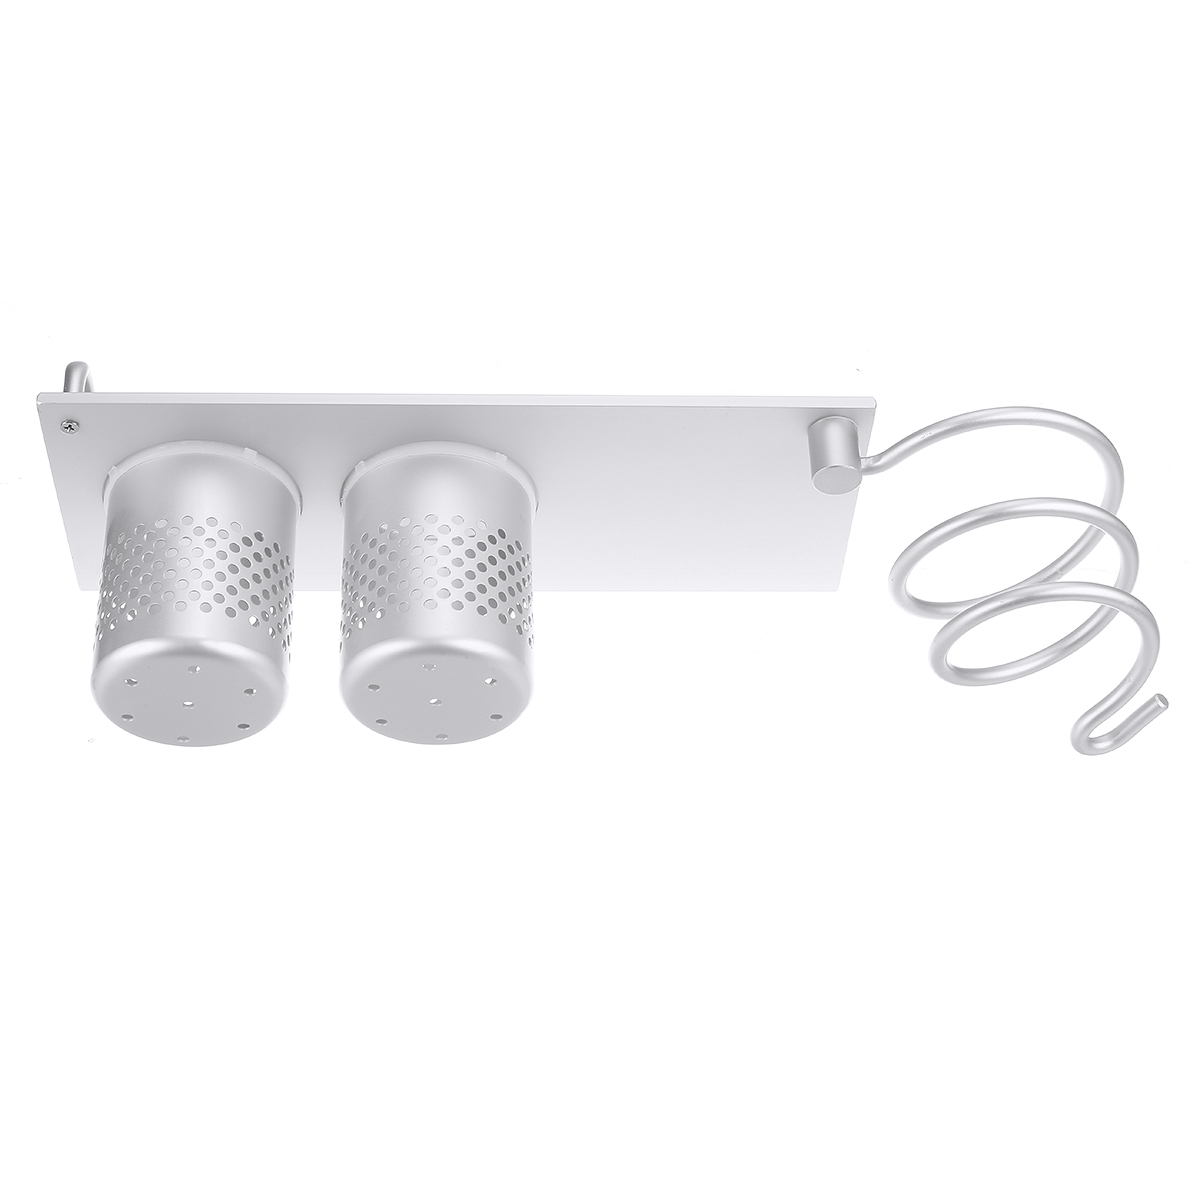 Stainless Steel With Double Bucket Hair Dryer Rack